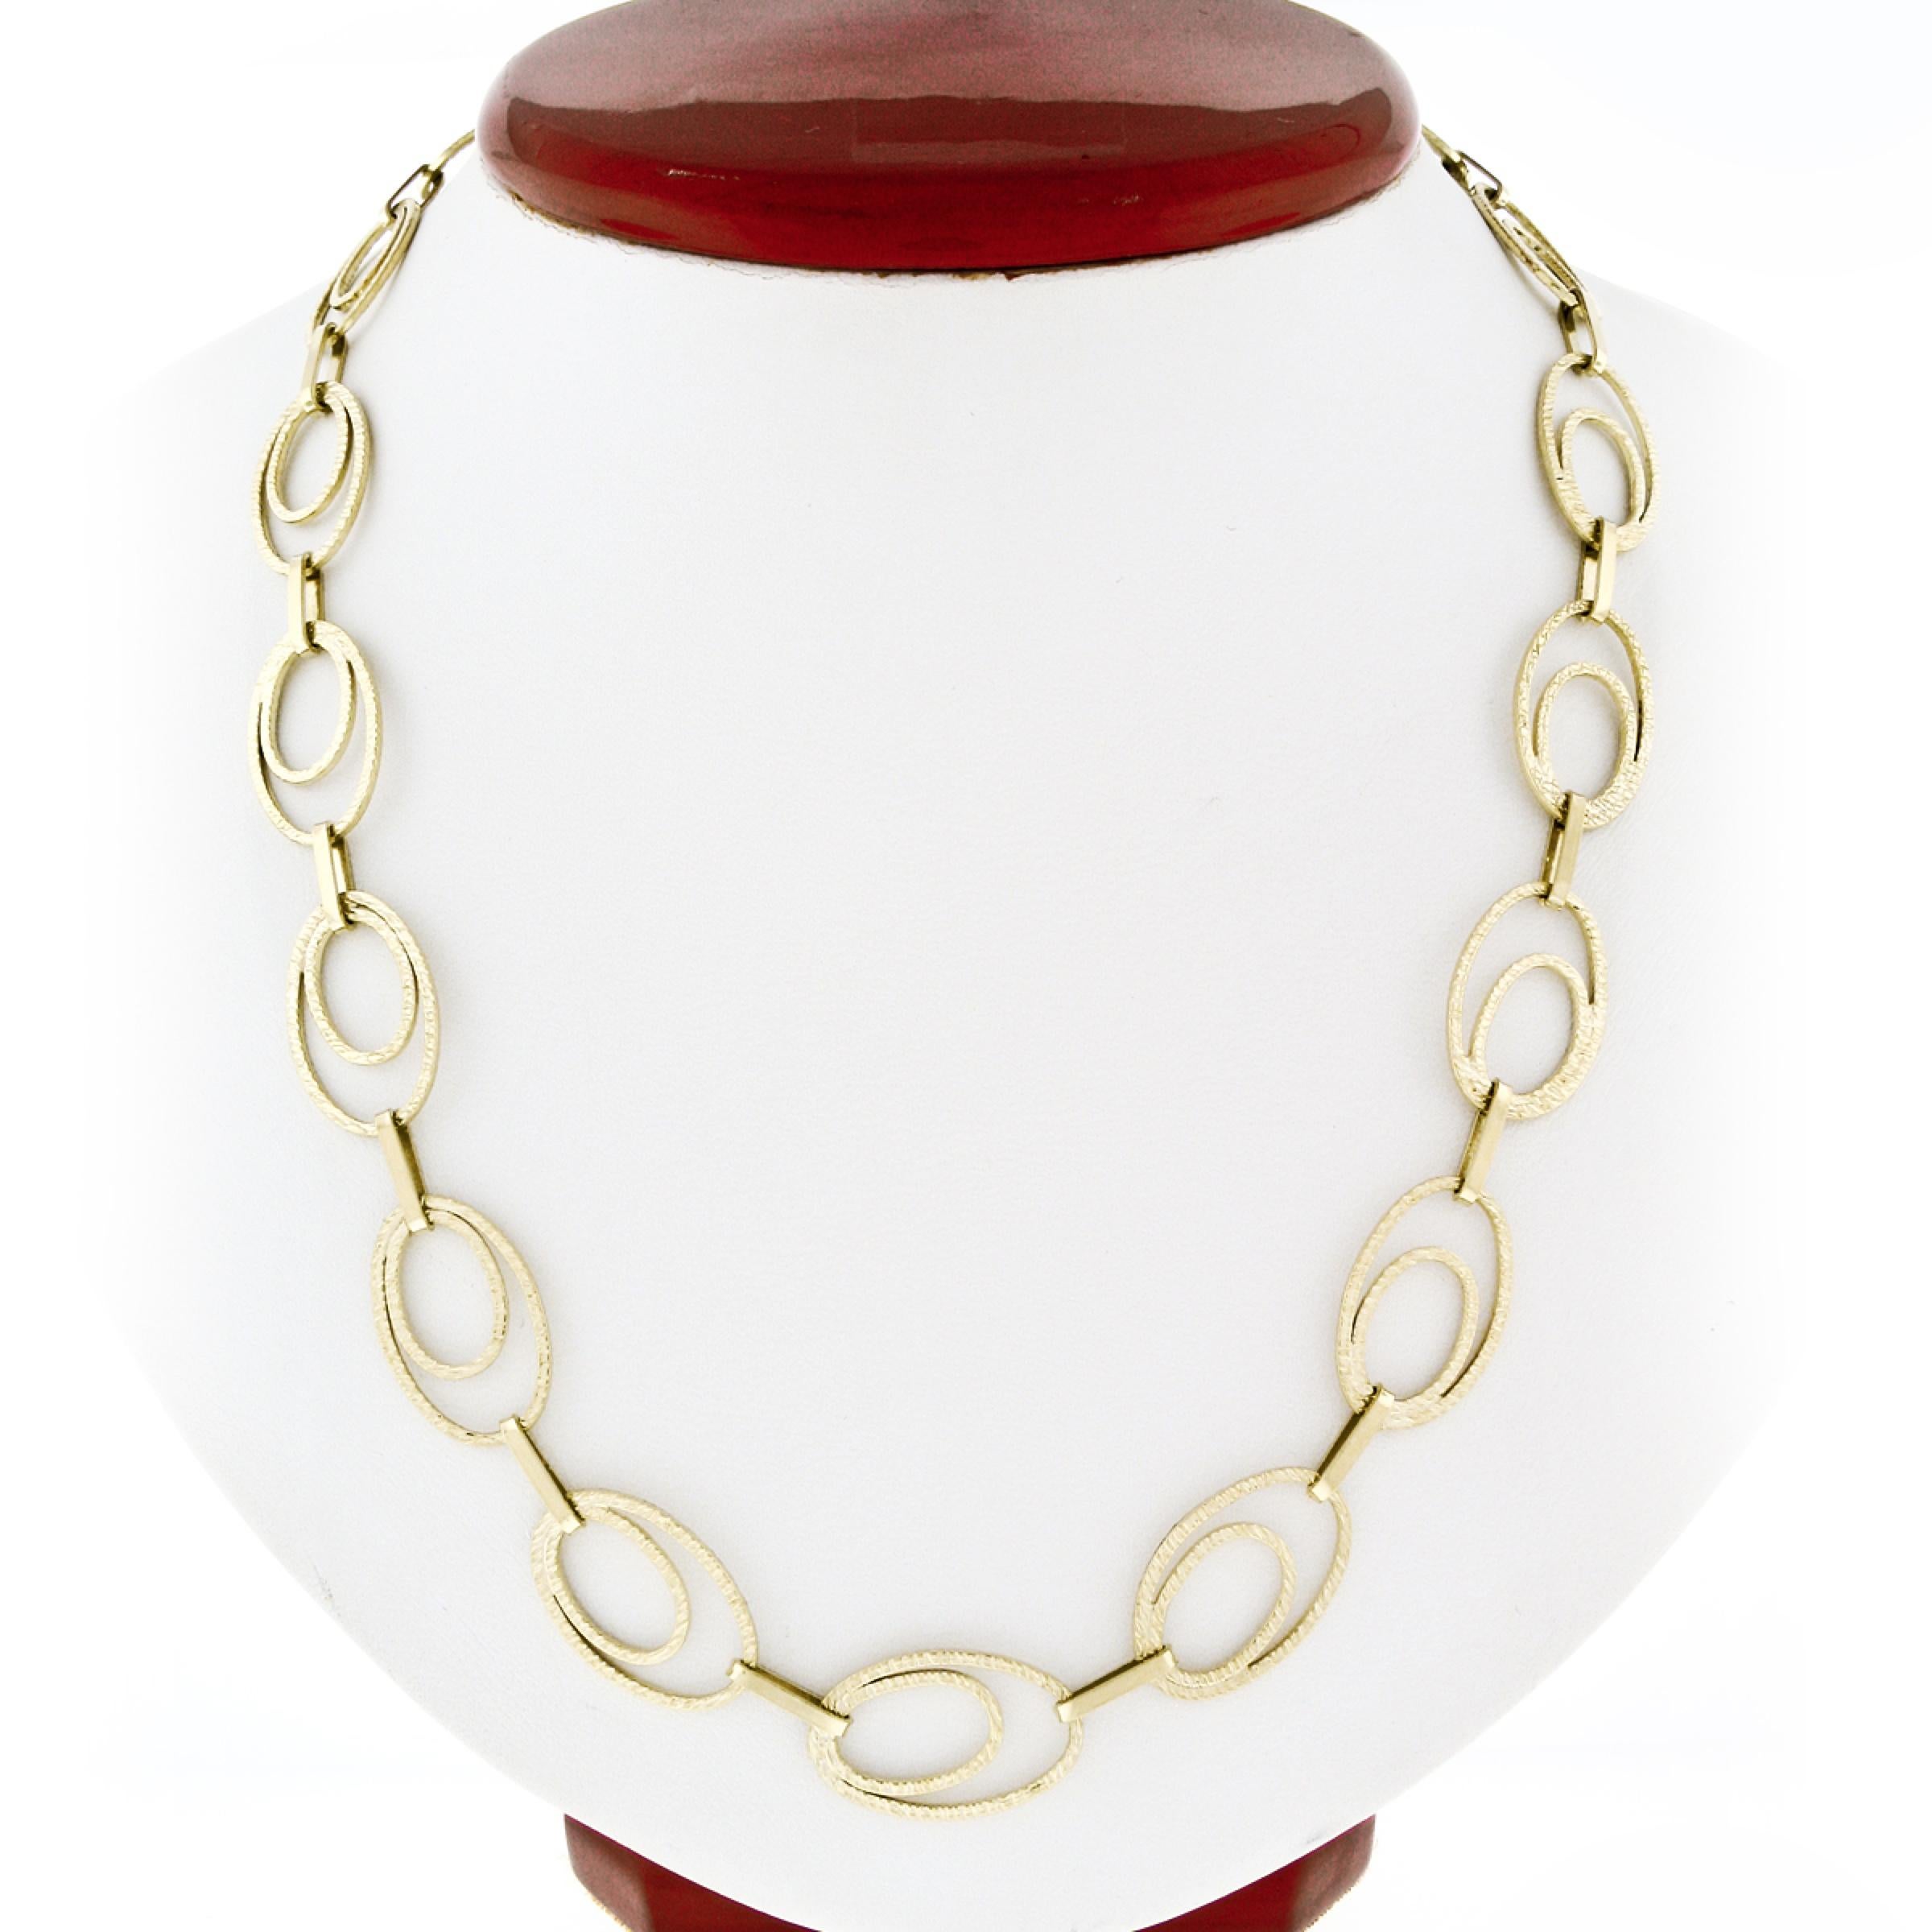 s statement 14k yellow gold necklace features open, dual oval links which elegantly interlock showing absolutely amazing texture throughout. The chain displays beautiful long look measuring 28 inches overall, and is secured with sturdy spring ring